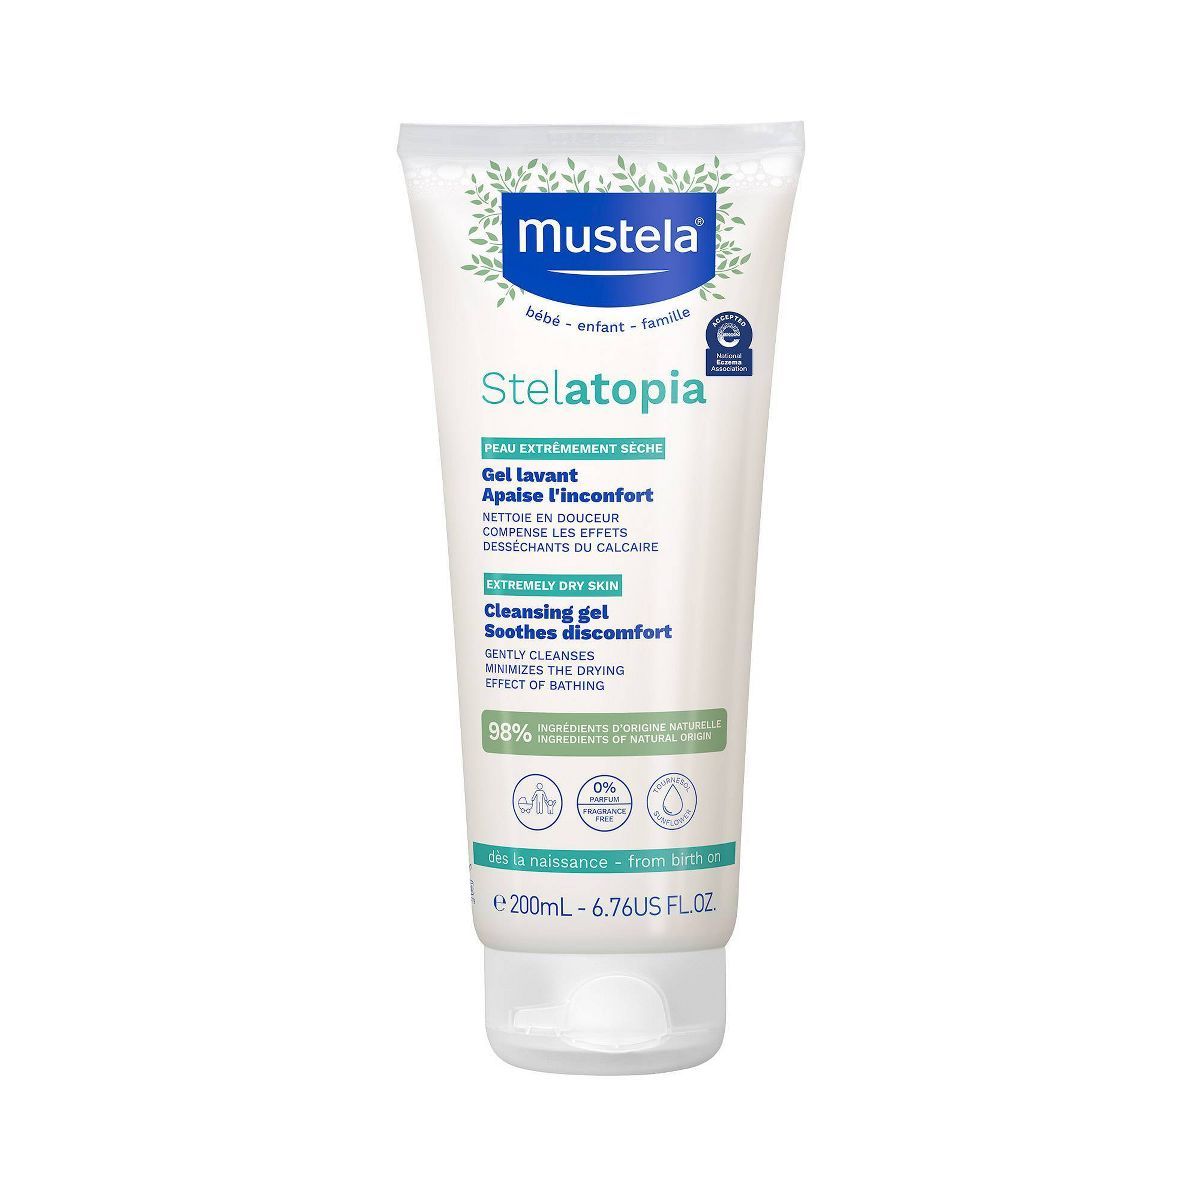 Mustela Stelatopia Fragrance Free Baby Cleansing Gel and Wash for Eczema Prone Skin - 6.76 fl oz | Target